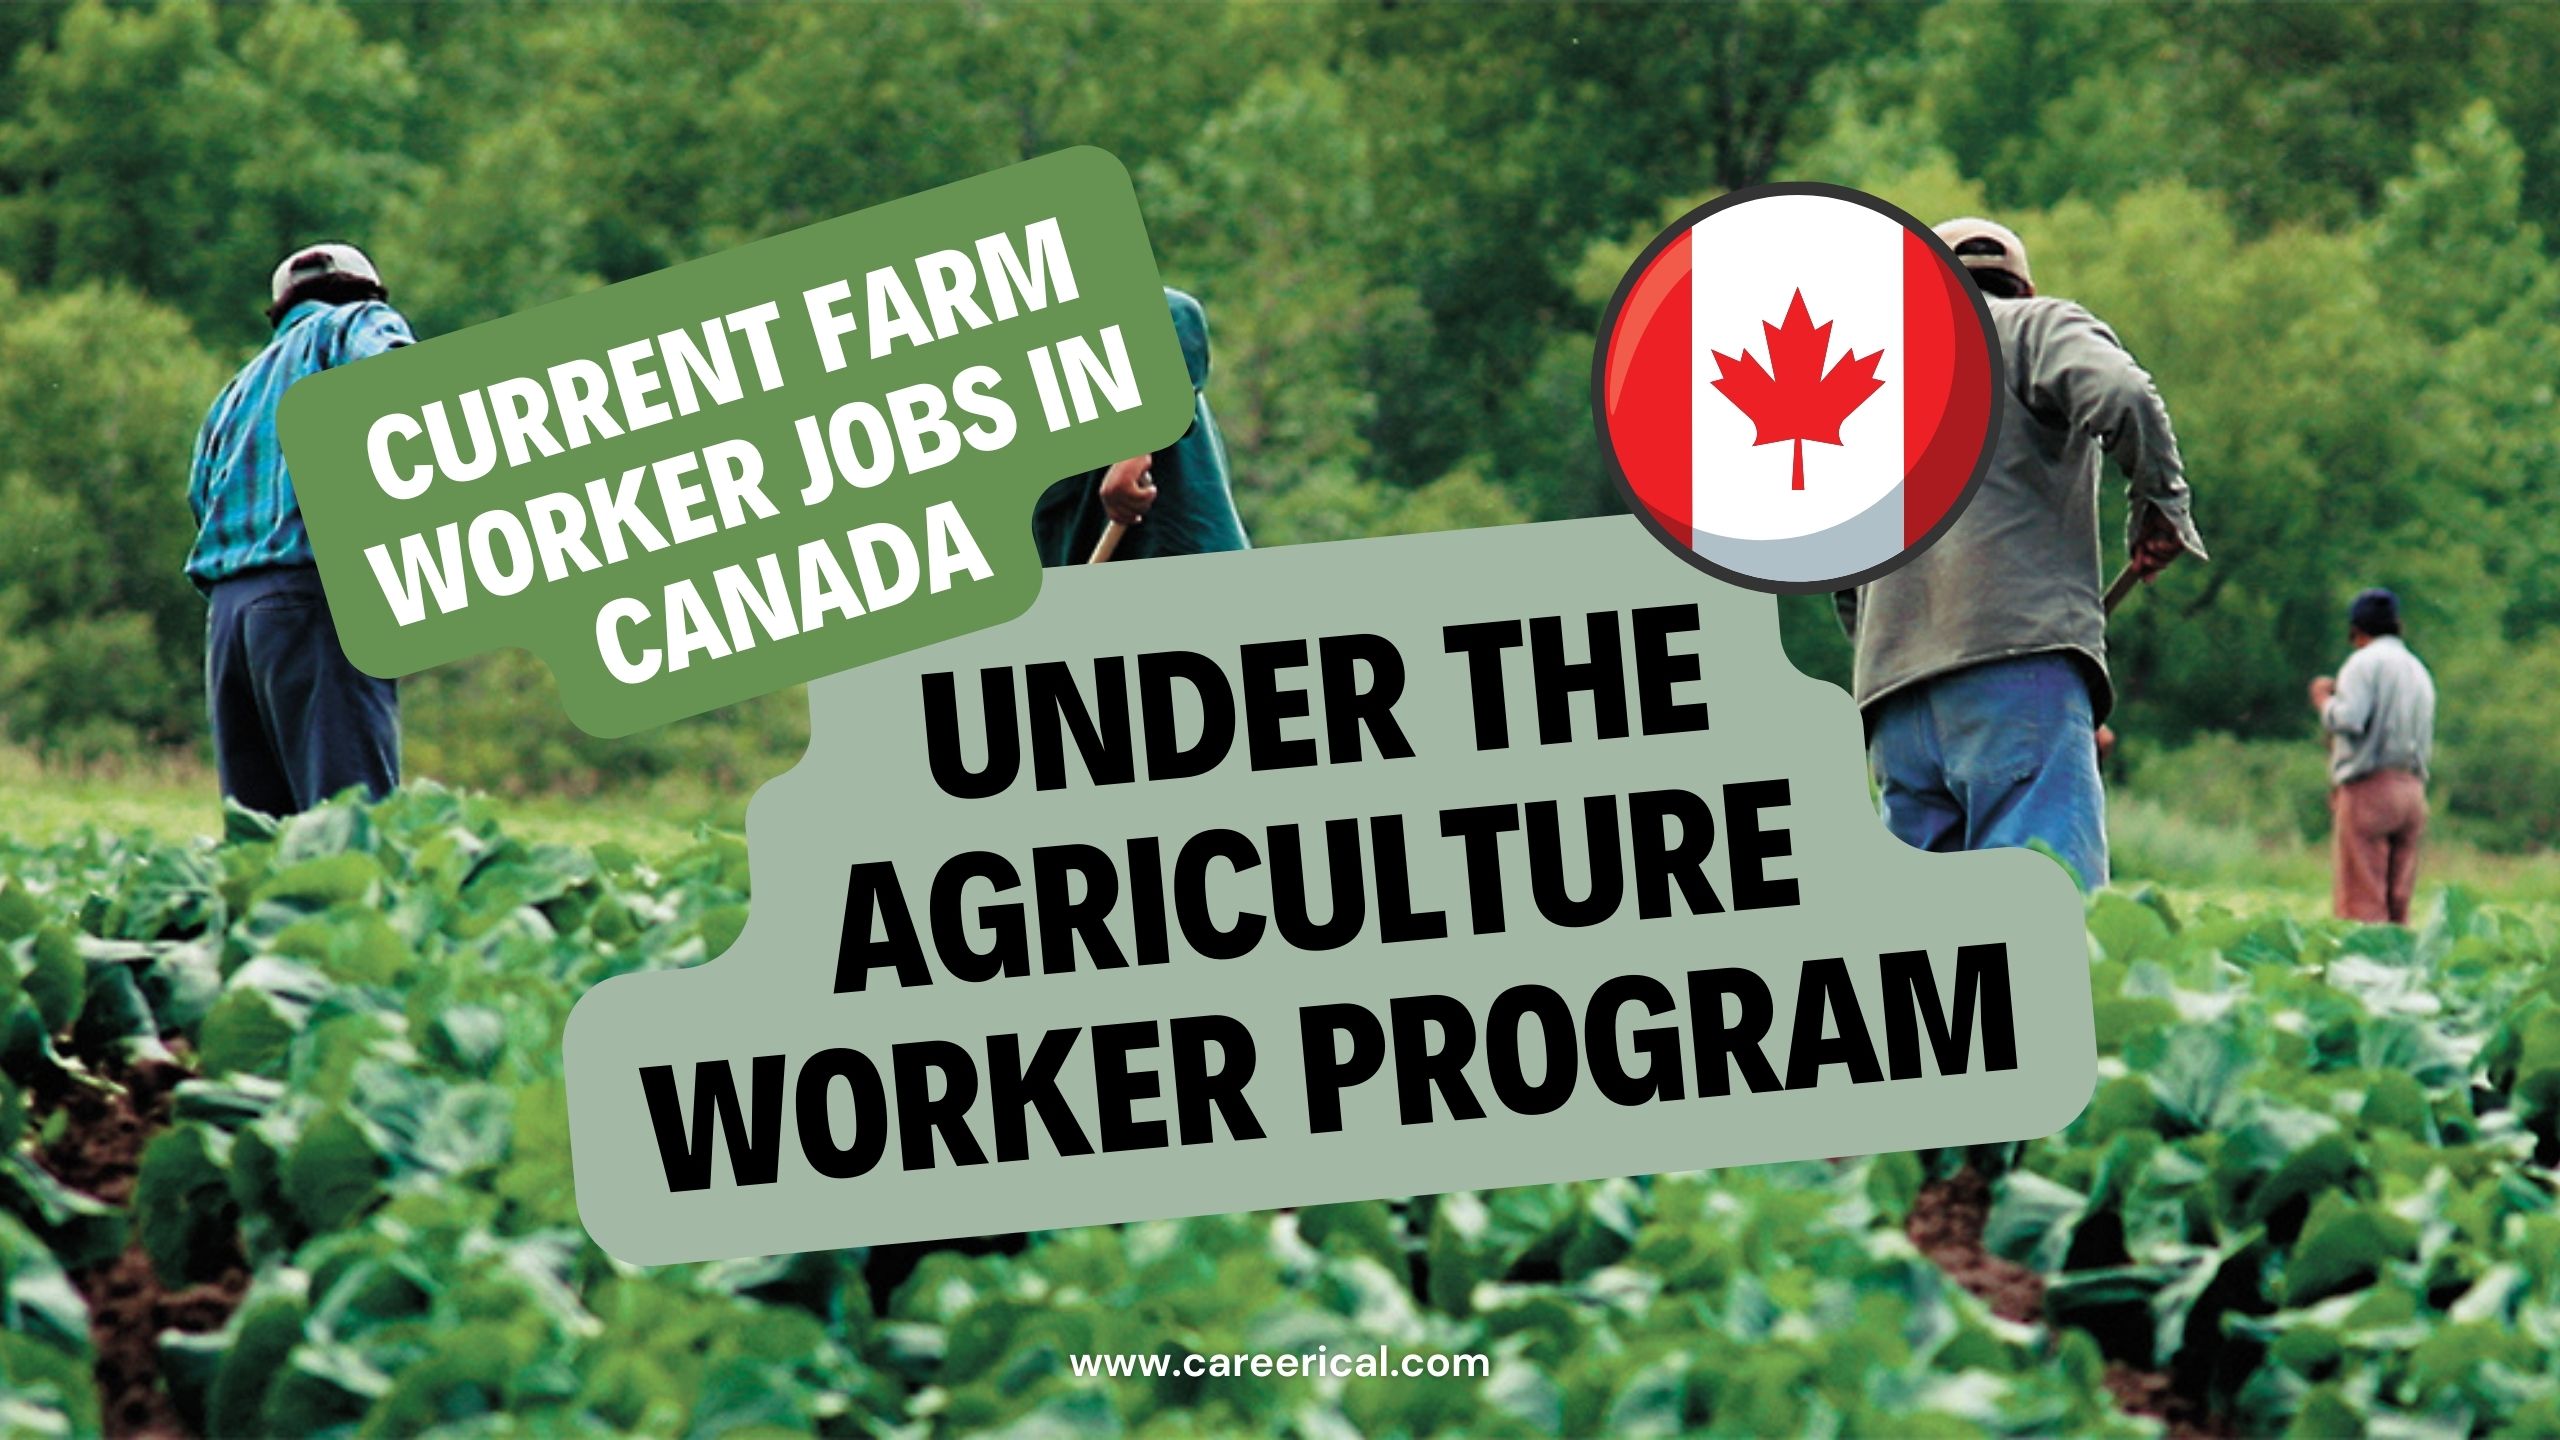 Current Farm Worker Jobs in Canada under the Agriculture Worker Program